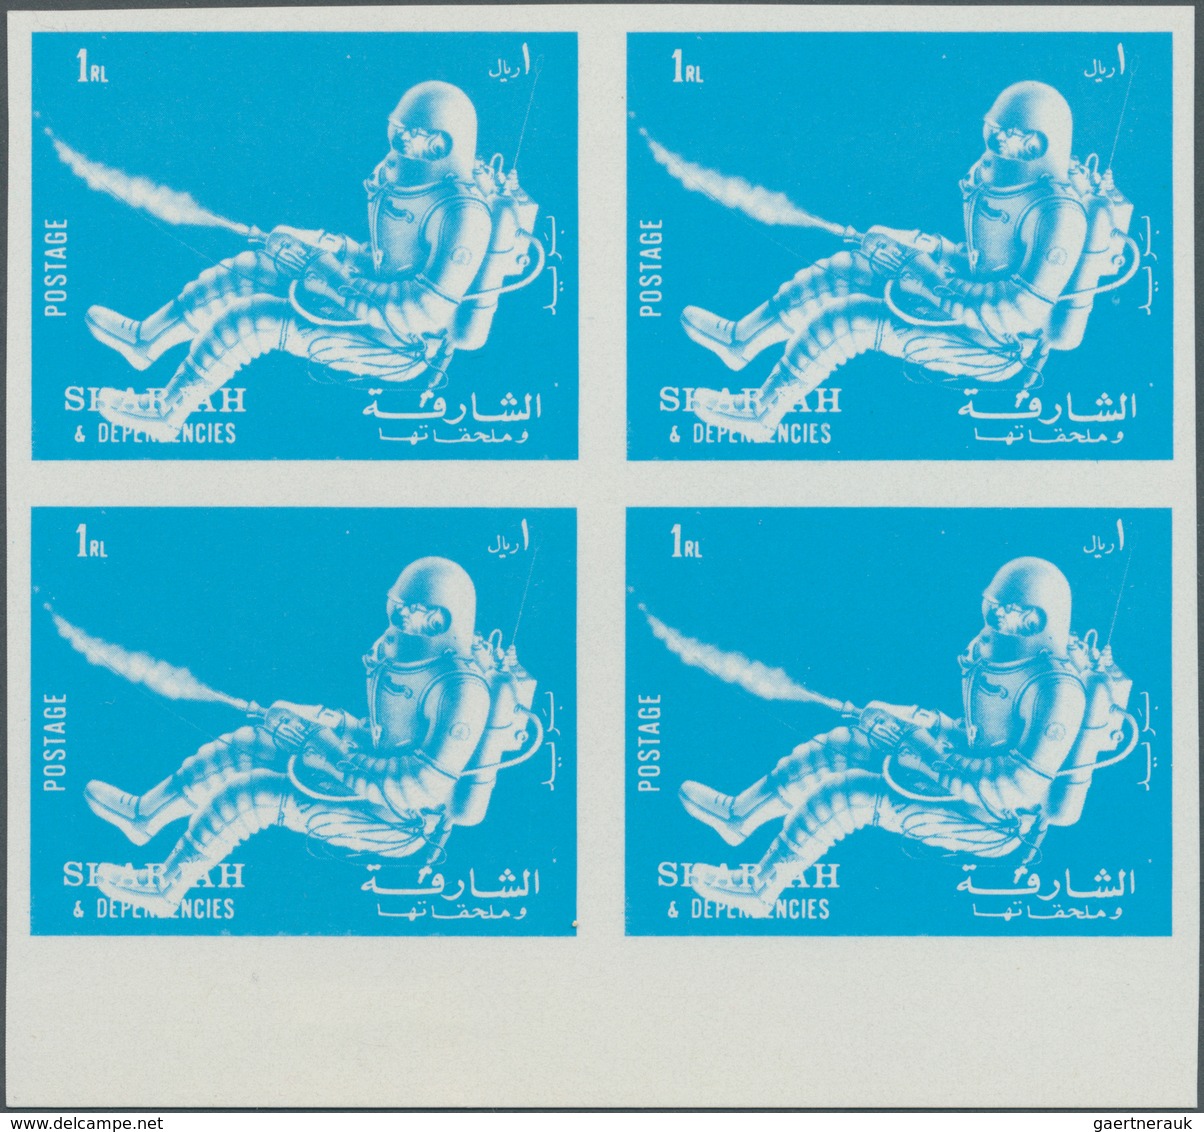 Naher Osten: 1958/1972, Arab states, comprensive holding of various issues, comprising Sharjah, Fuje